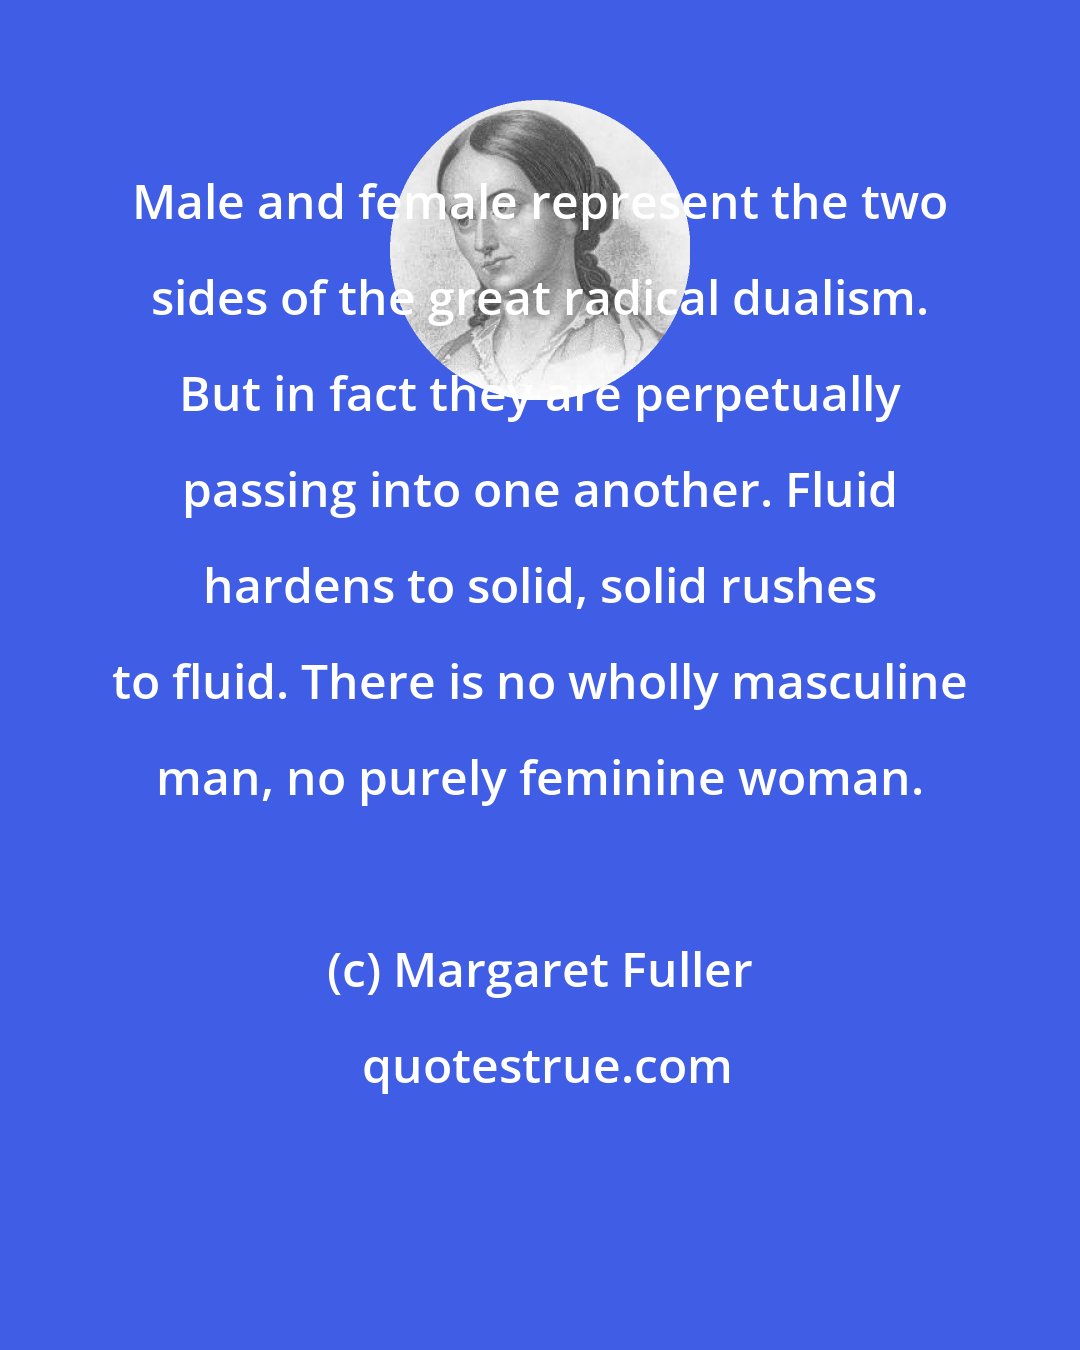 Margaret Fuller: Male and female represent the two sides of the great radical dualism. But in fact they are perpetually passing into one another. Fluid hardens to solid, solid rushes to fluid. There is no wholly masculine man, no purely feminine woman.